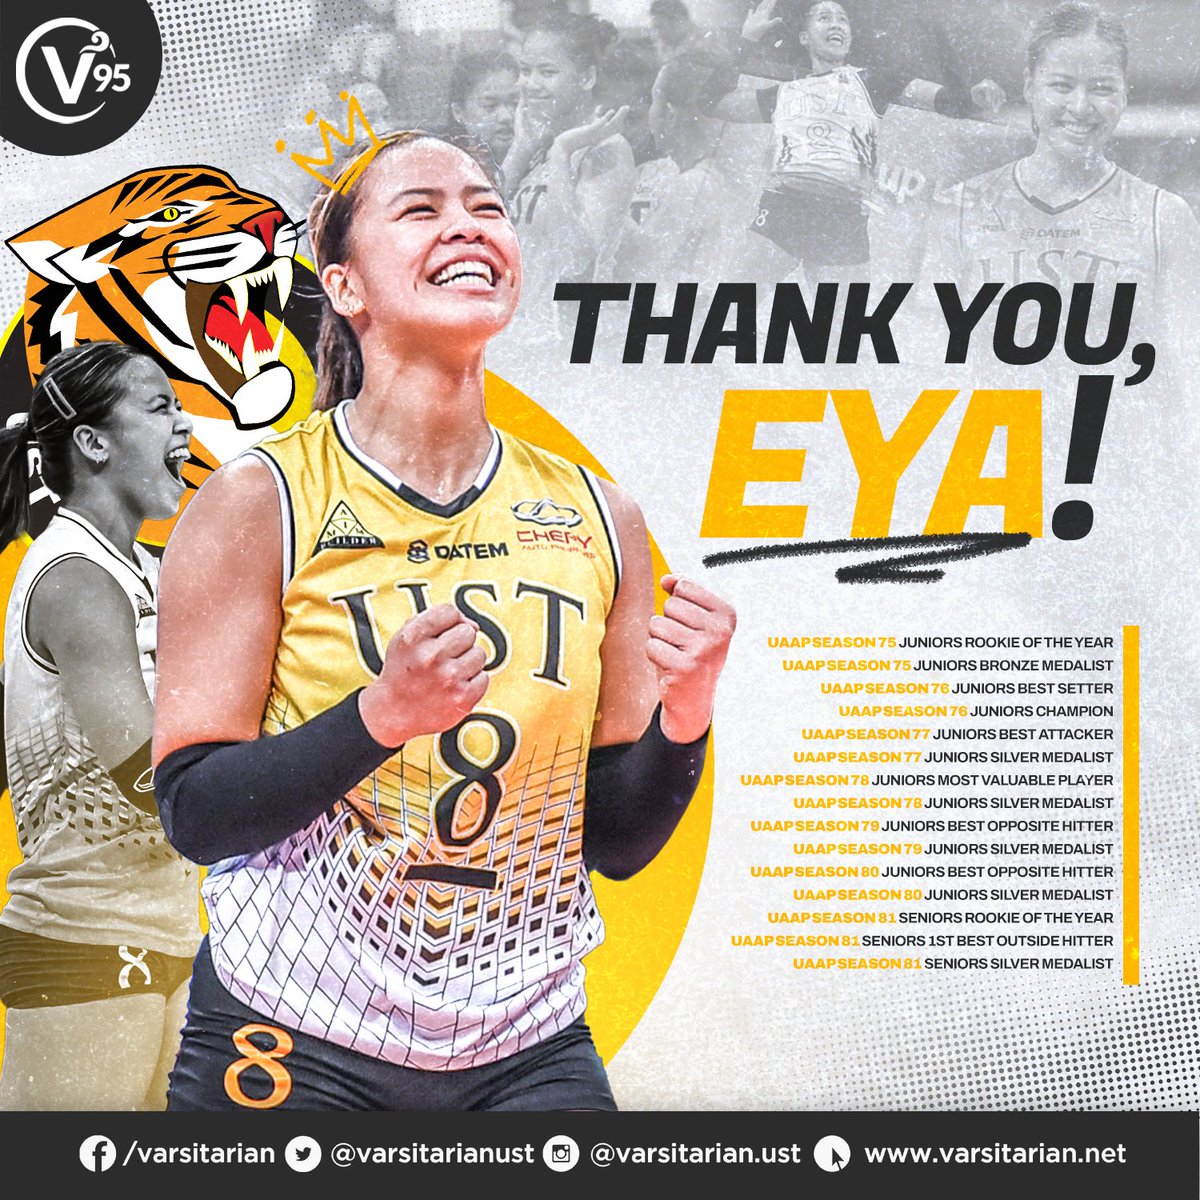 THANK YOU, EYA! 🖤💛

Eya Laure's spectacular run as a UST Golden Tigress has officially ended. The volleyball superstar announced on social media Thursday night that she will turn professional after 12 years in UST.